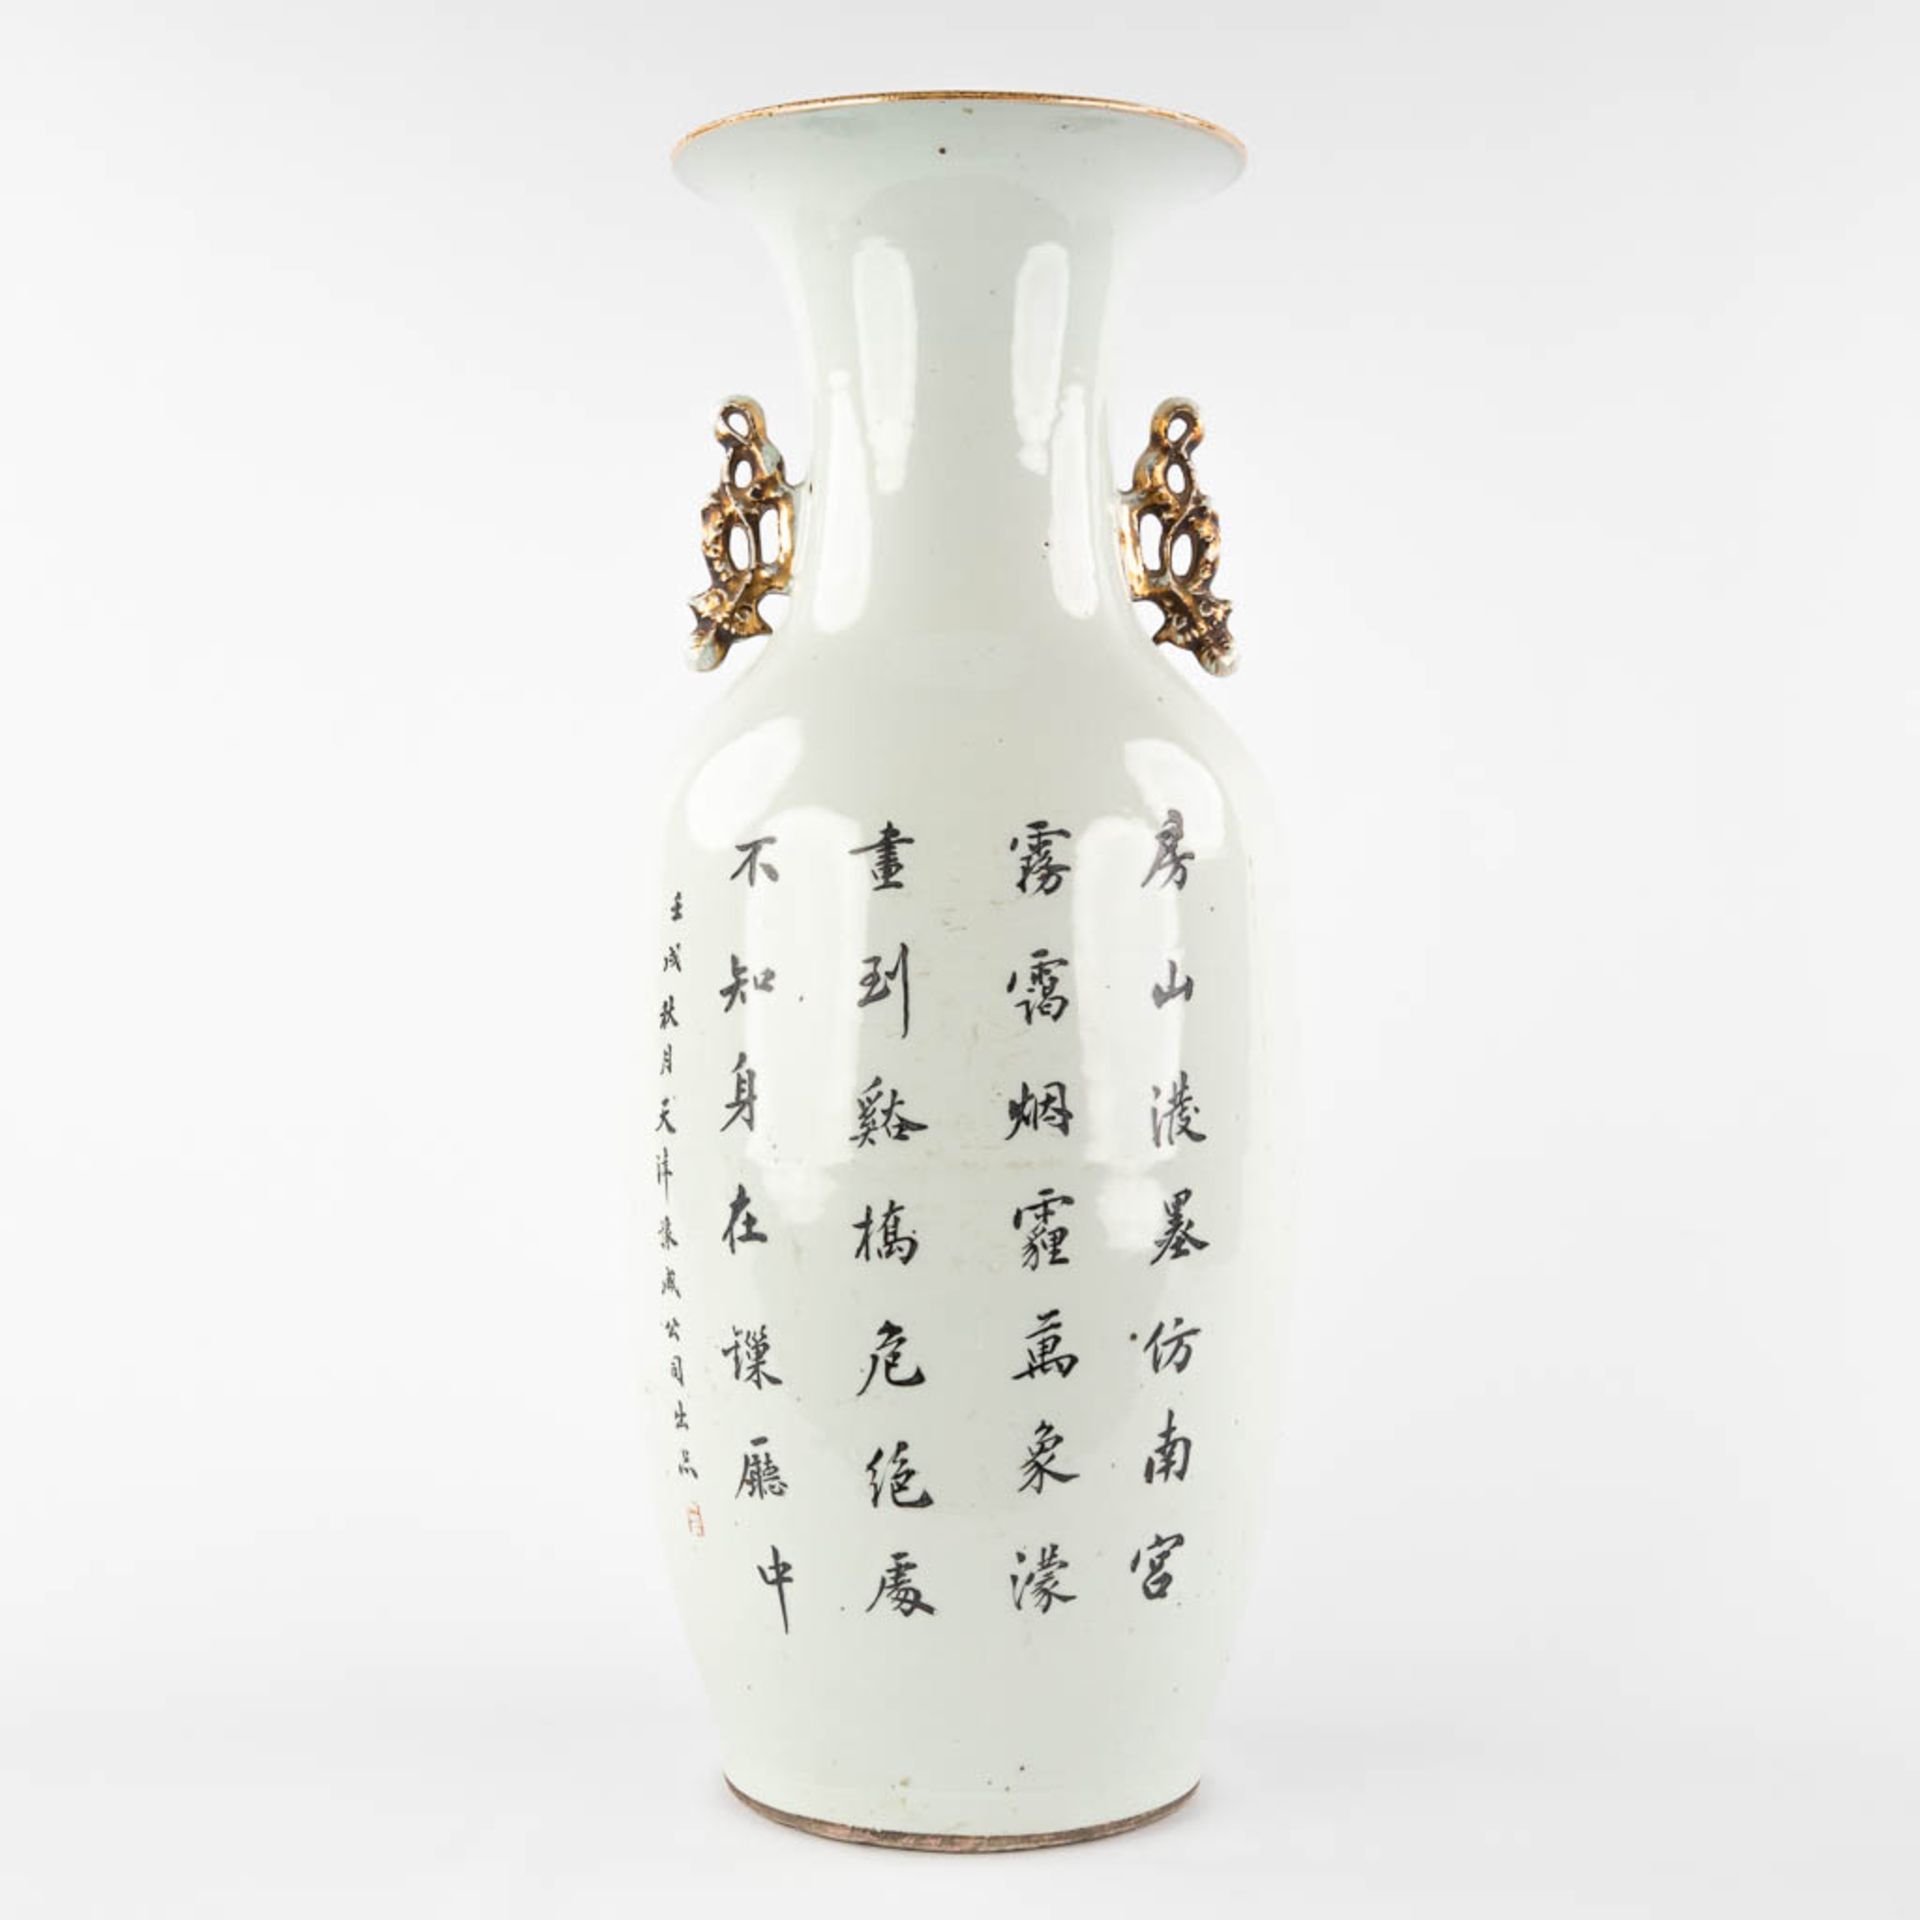 A Chinese vase decorated with ladies and calligraphic texts. 19th/20th C. (H:58 x D:22 cm) - Image 5 of 12